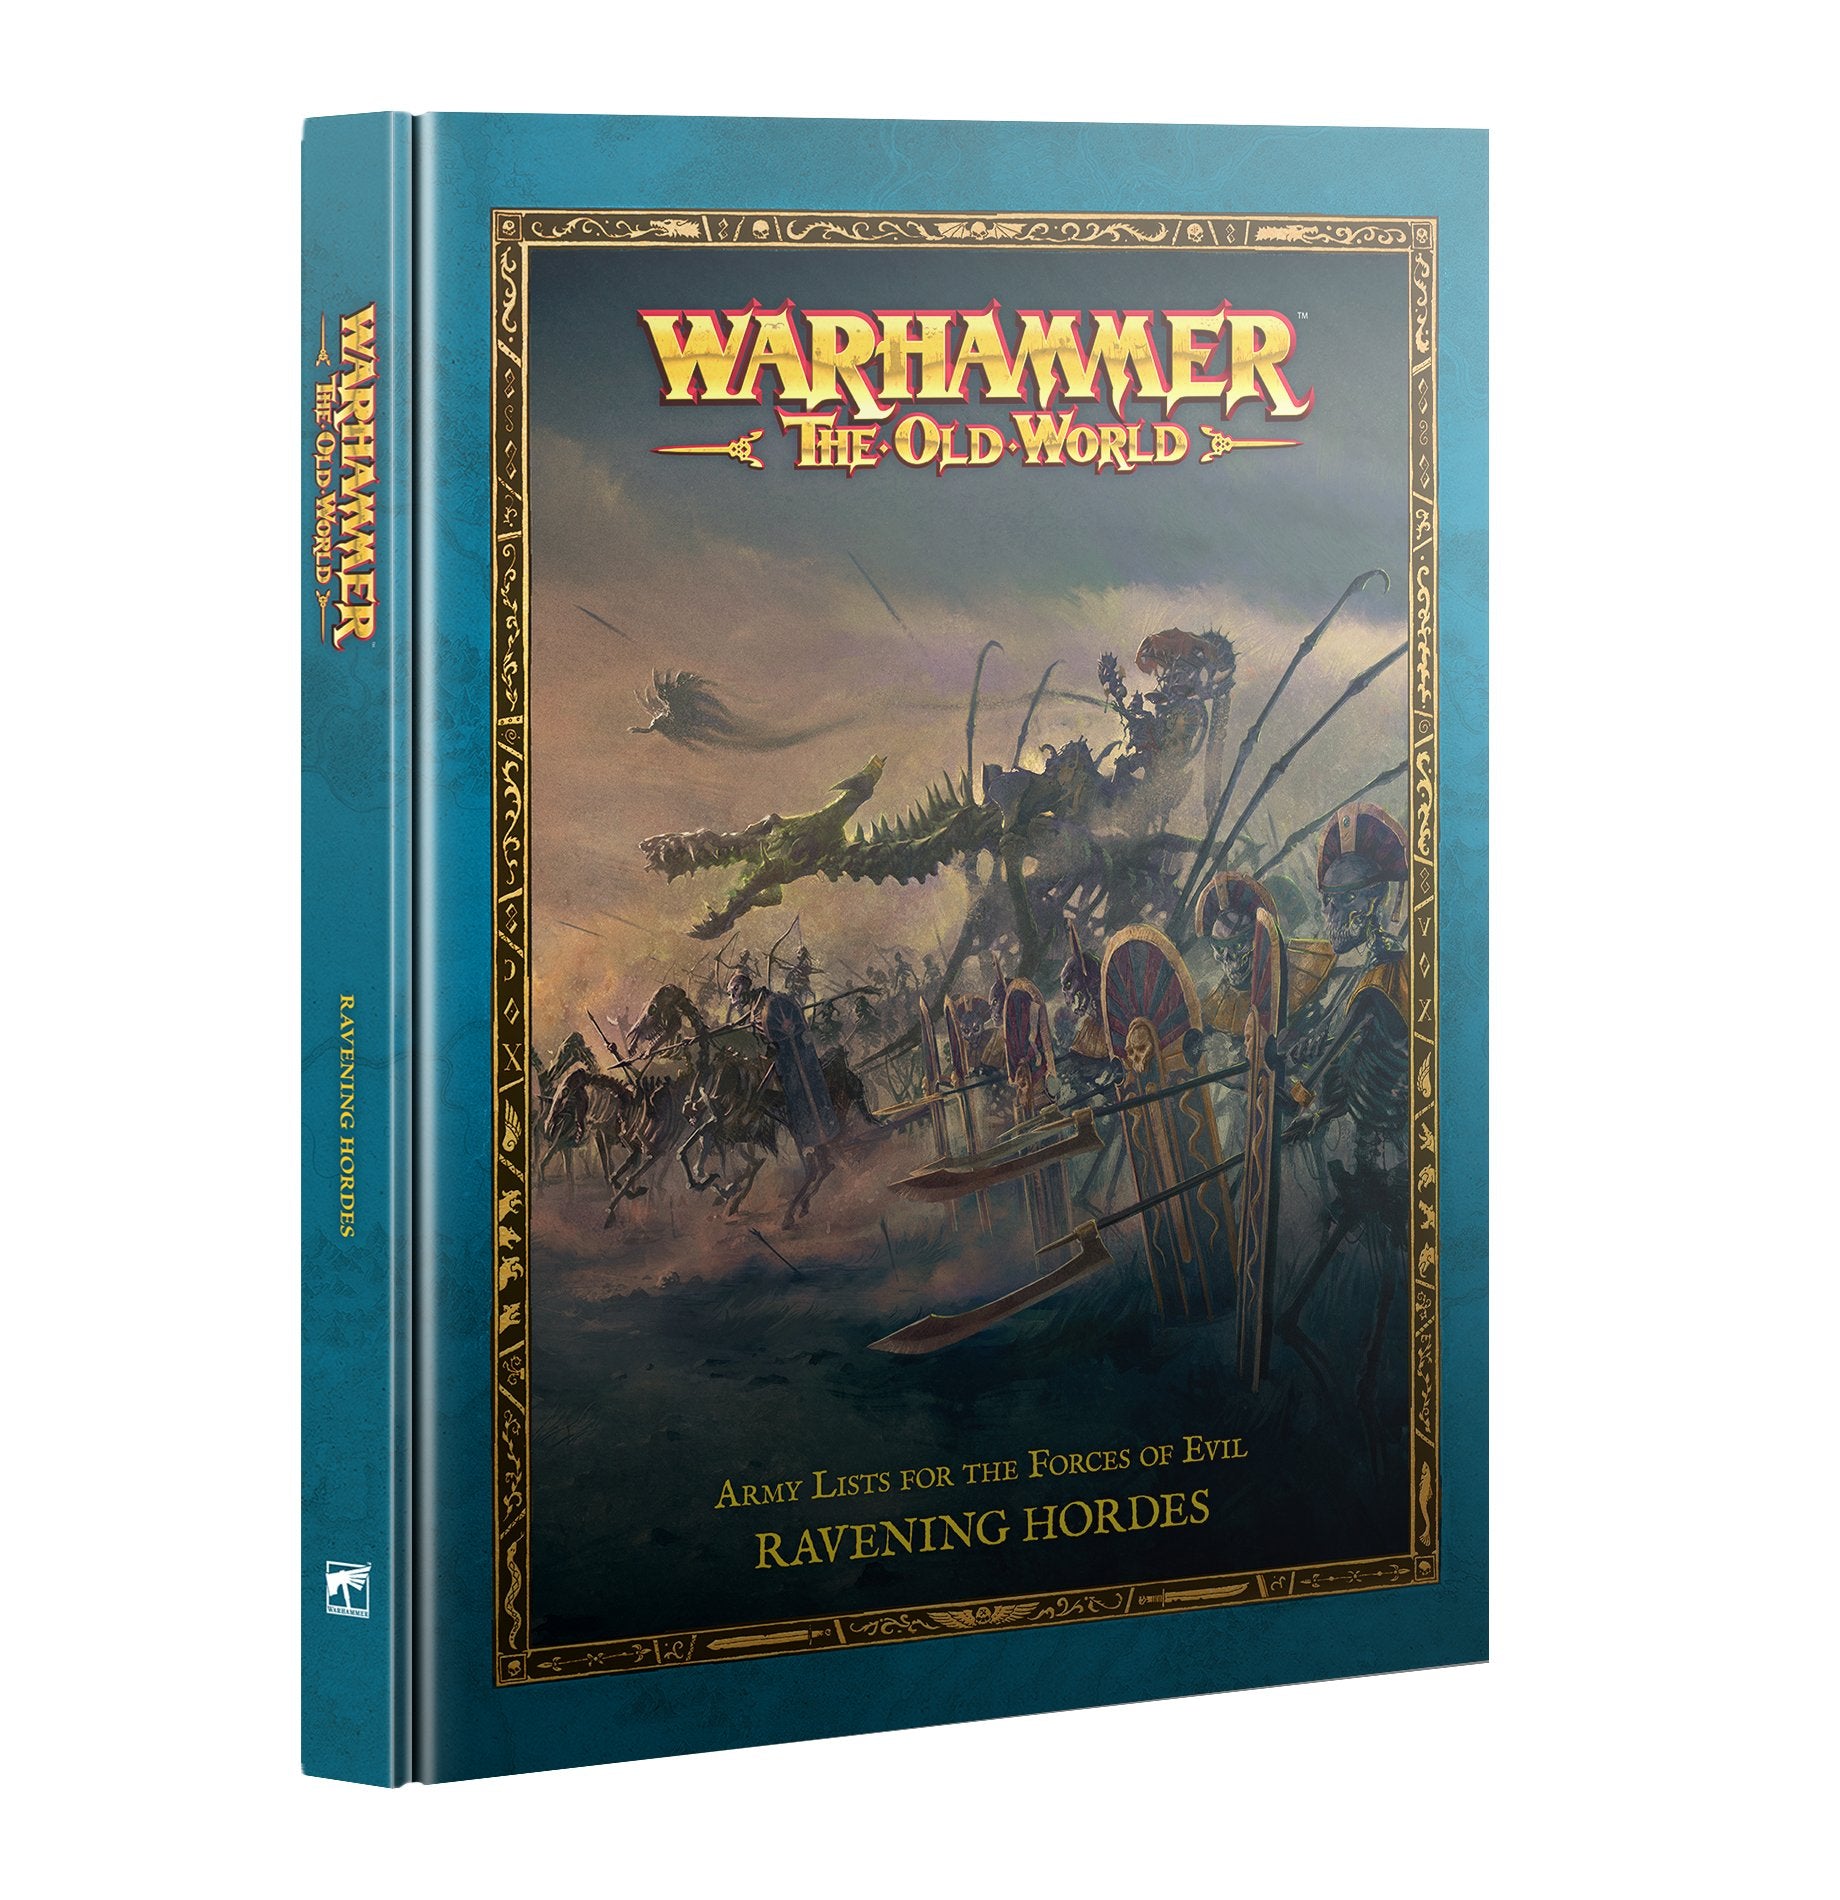 Warhammer: The Old World - Ravening Hordes - Release Date 20/1/24 - Loaded Dice Barry Vale of Glamorgan CF64 3HD